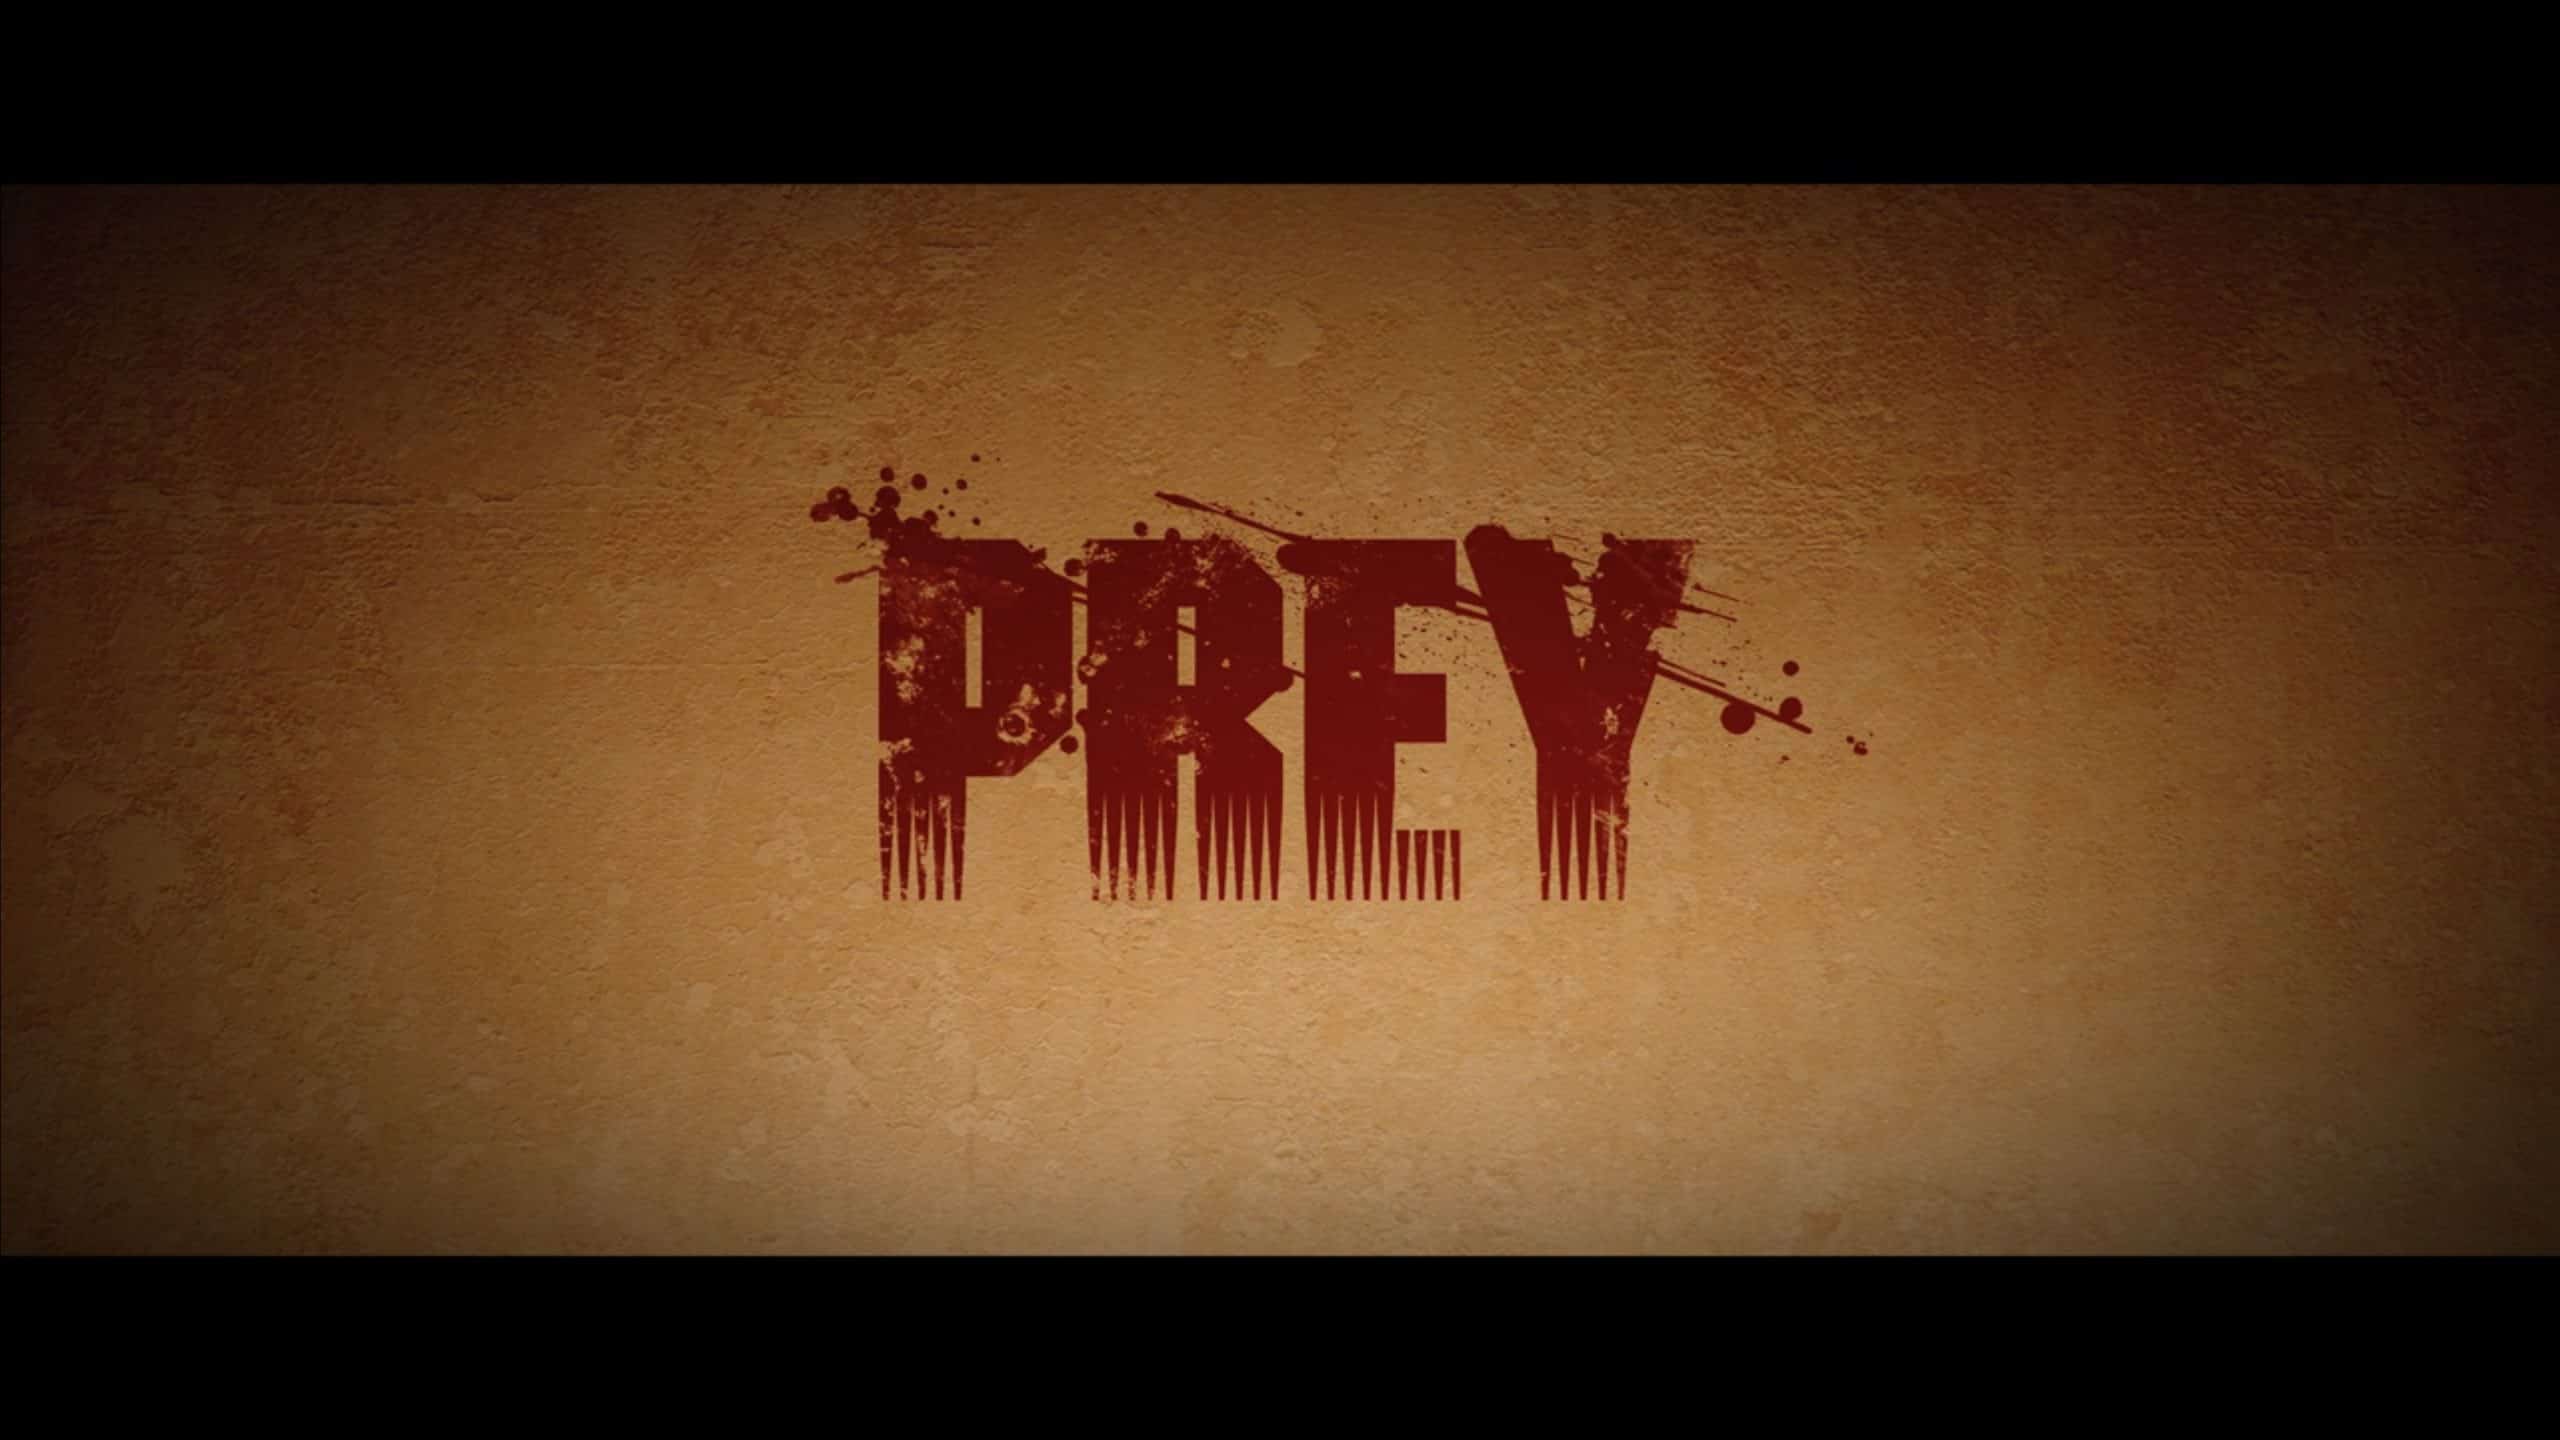 The end movie title card for 'Prey'